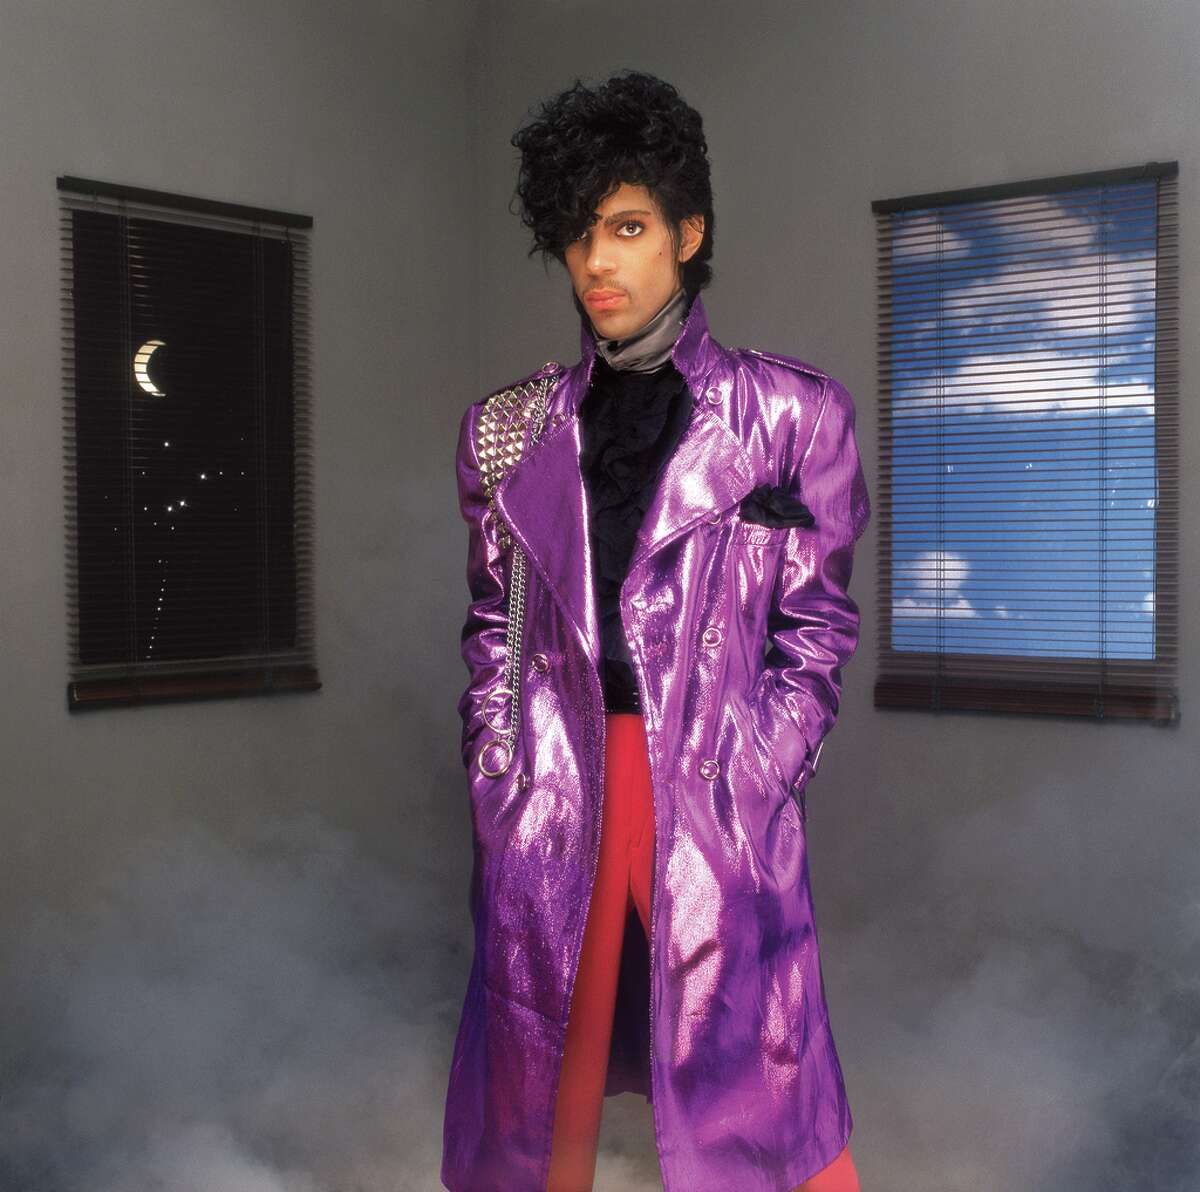 Prince had a major breakthrough with his '1999' album, released in 1982.